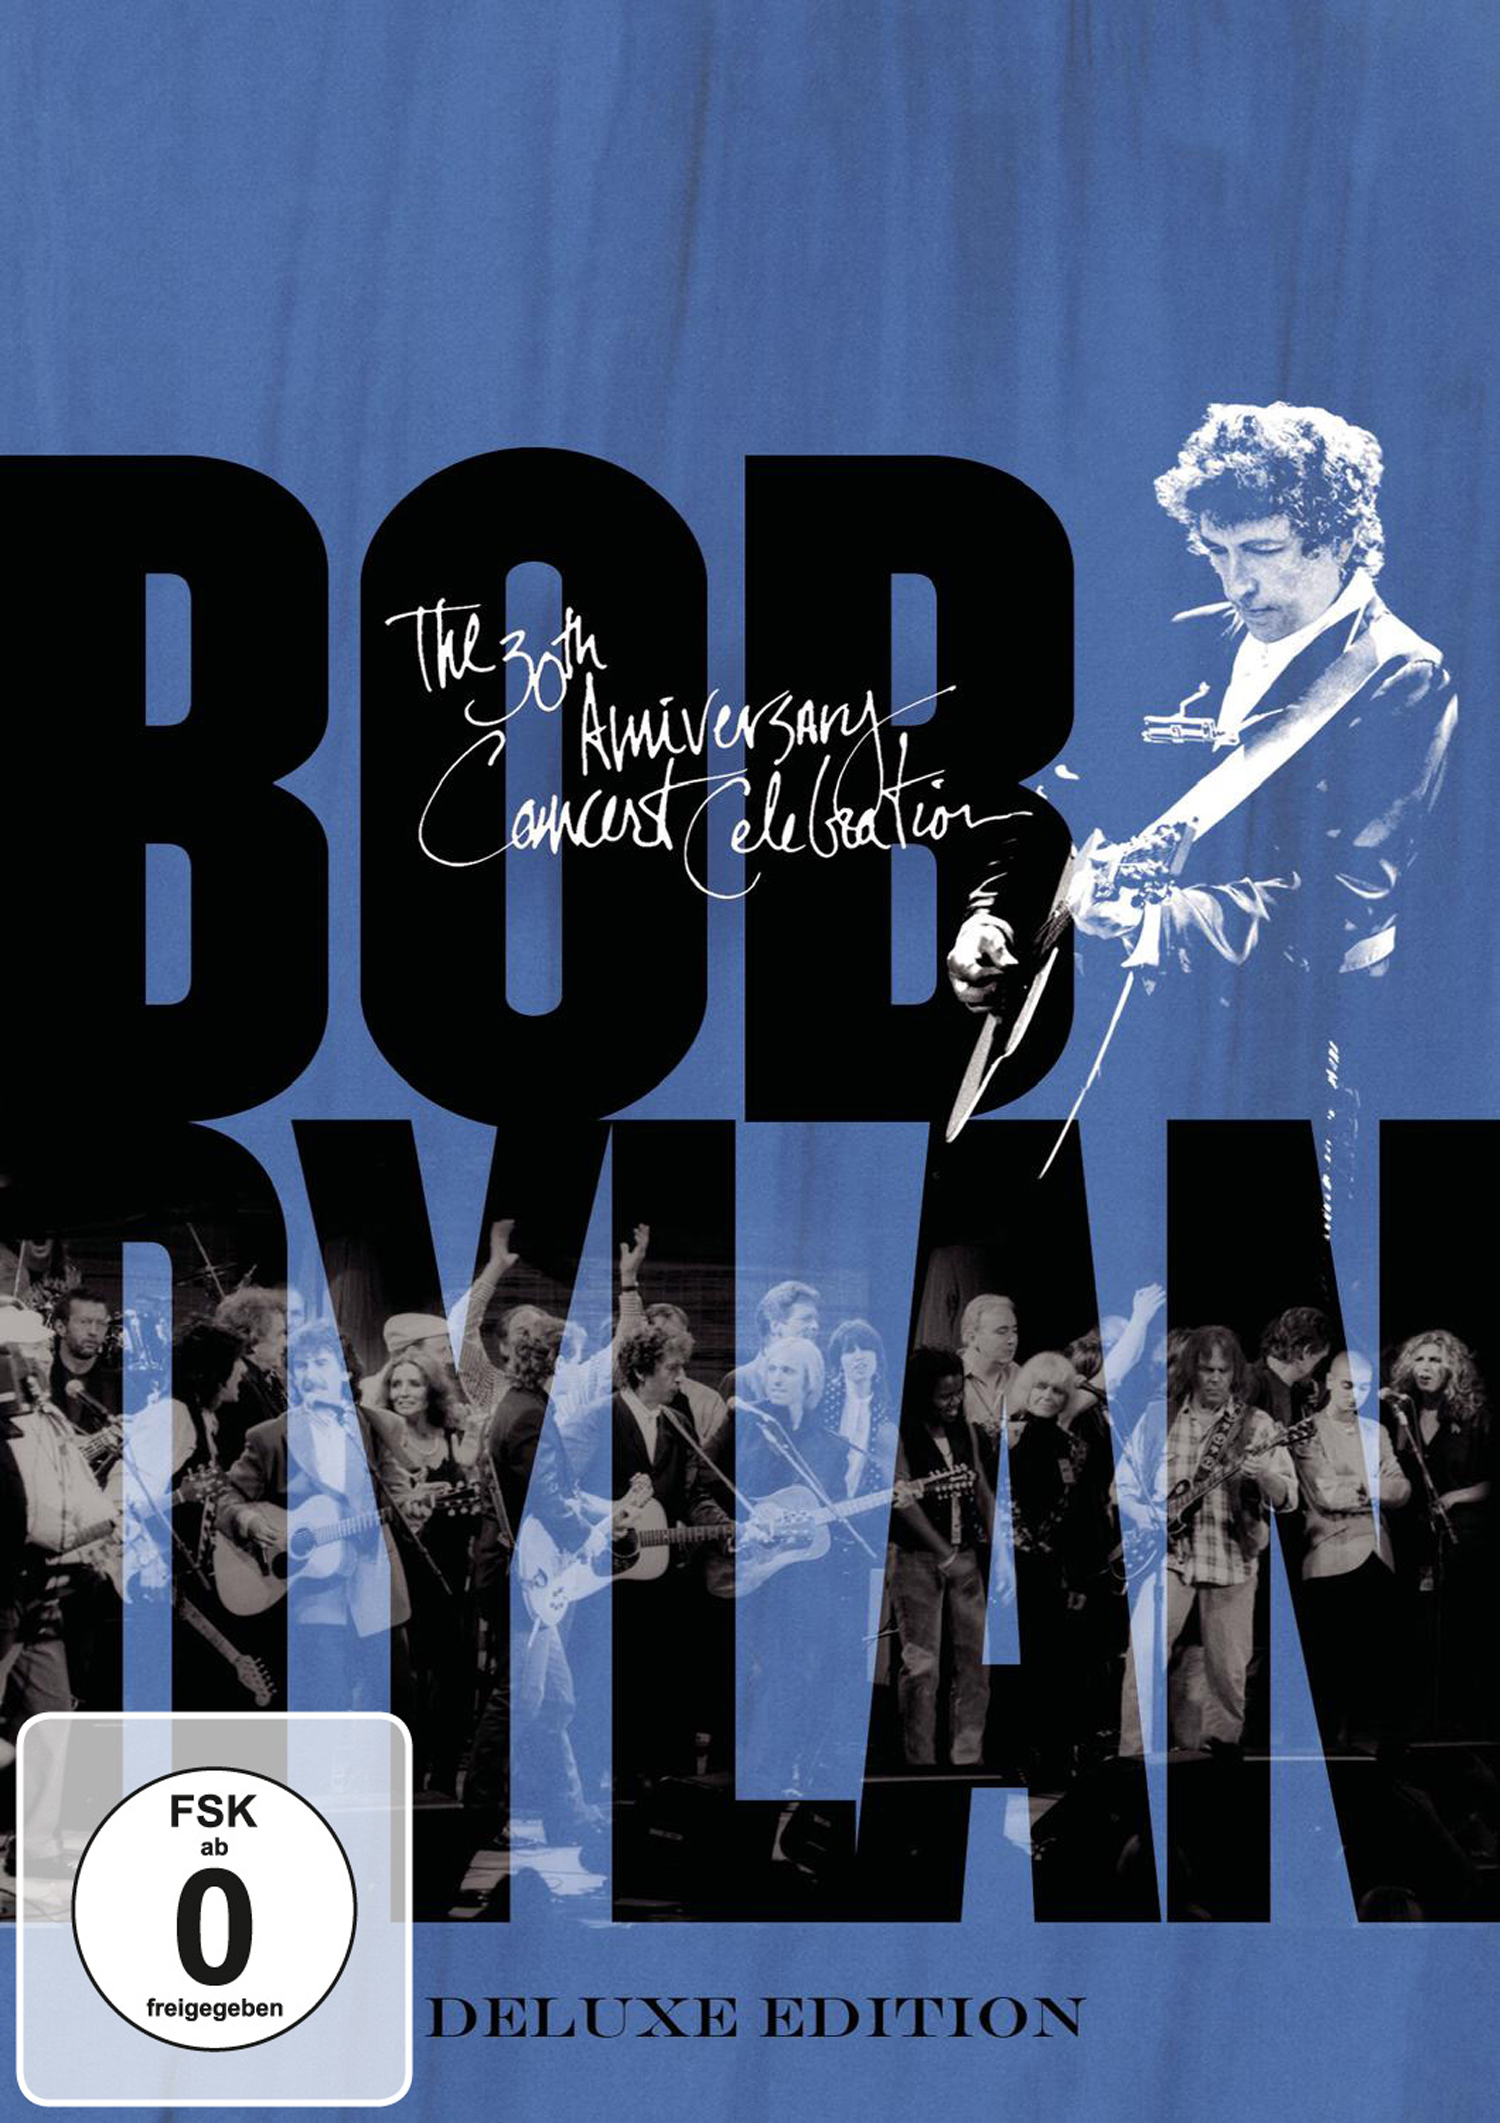 Celebration (DVD) Edition) VARIOUS - Bob Anniversary (Deluxe Dylan, Concert - 30th